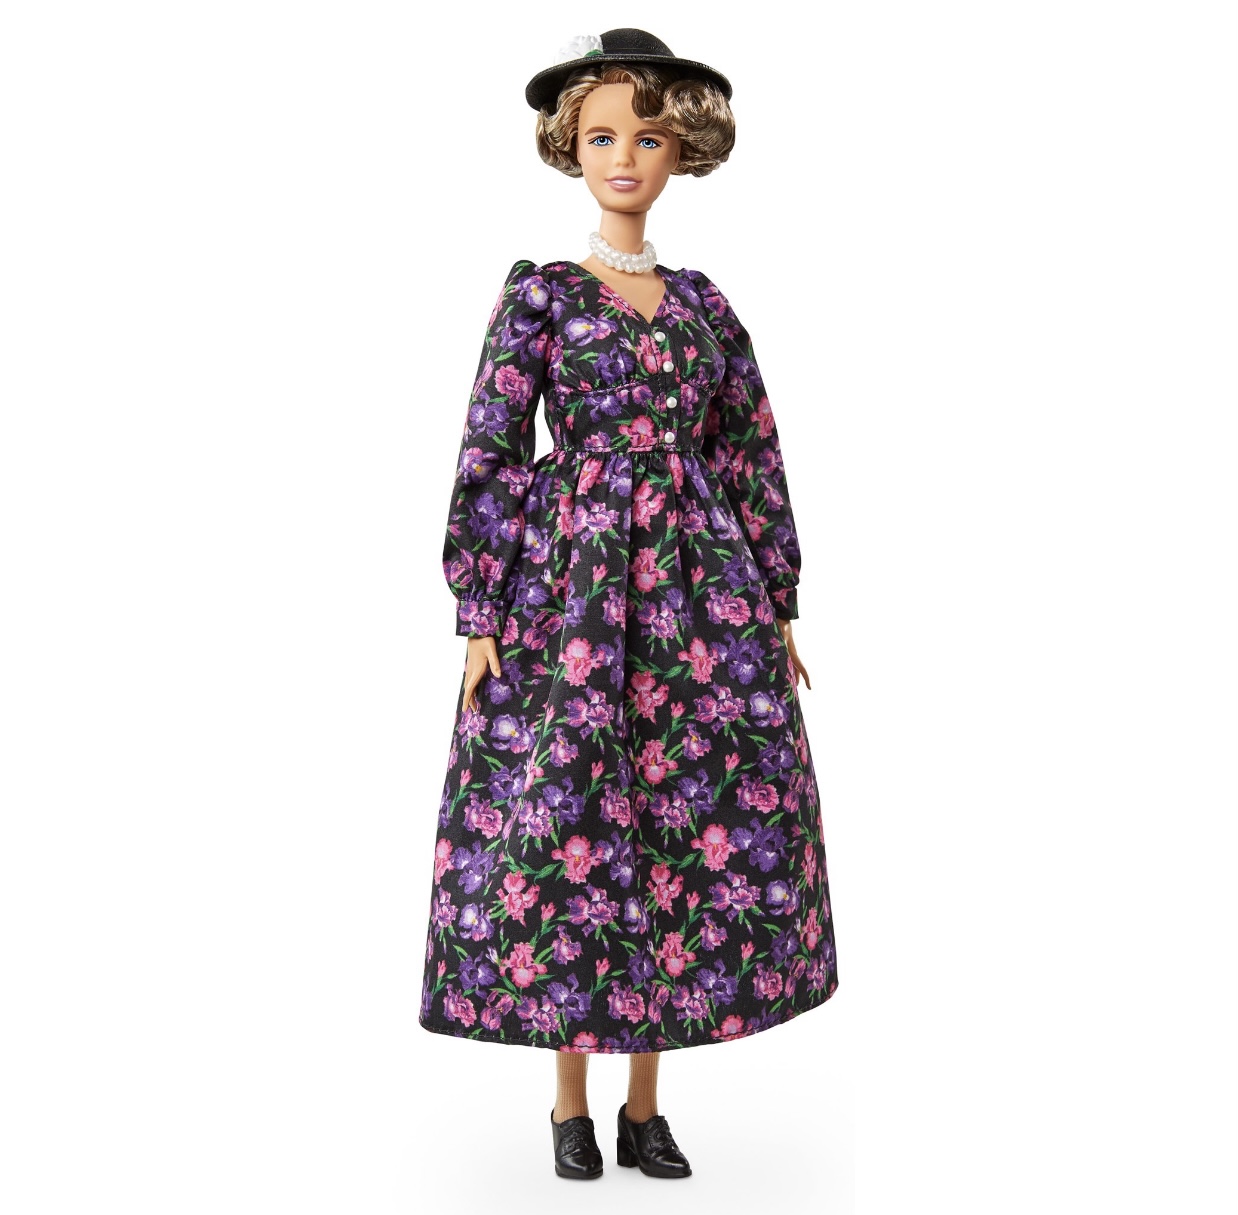 Barbie Inspiring Women Eleanor Roosevelt Doll (12-inch) Wearing Floral  Dress, with Doll Stand & Certificate of Authenticity, Gift for Kids &